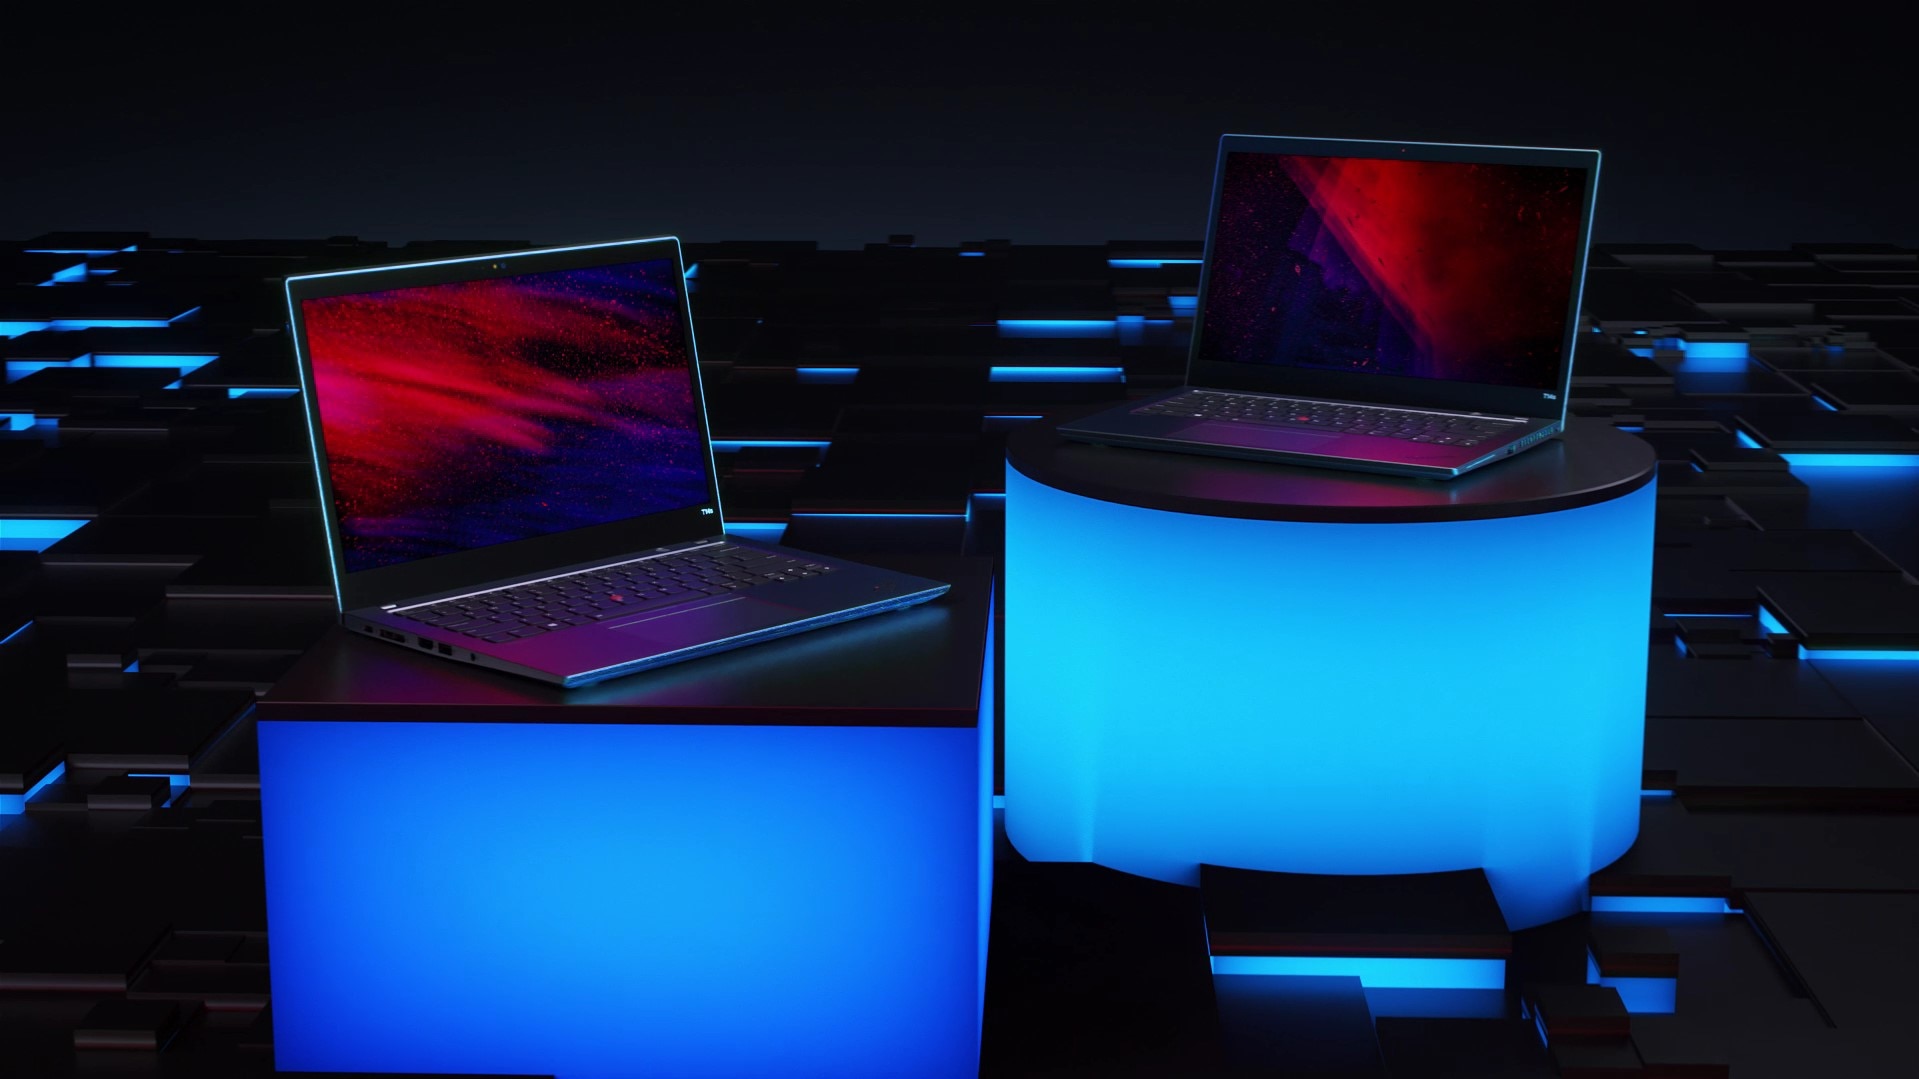 Two Lenovo ThinkPad L Series laptops, opened in laptop mode at a slight angle, each on a display stand with blue neon lighting.